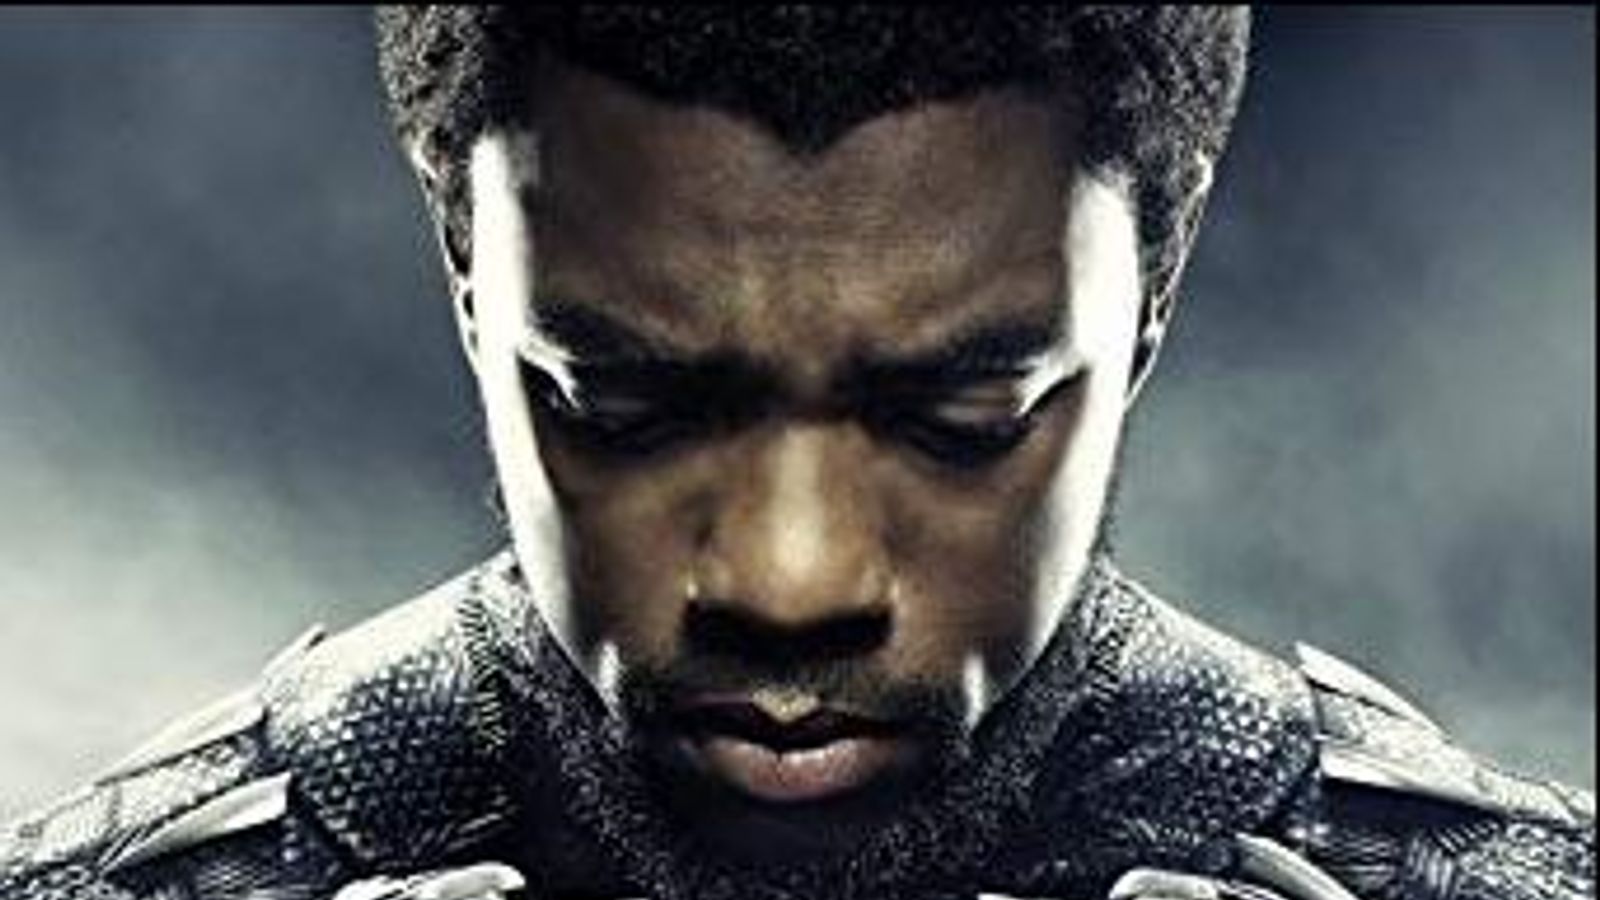 Chadwick Boseman Why Did Black Panther Have Such A Huge Impact Ents Arts News Sky News